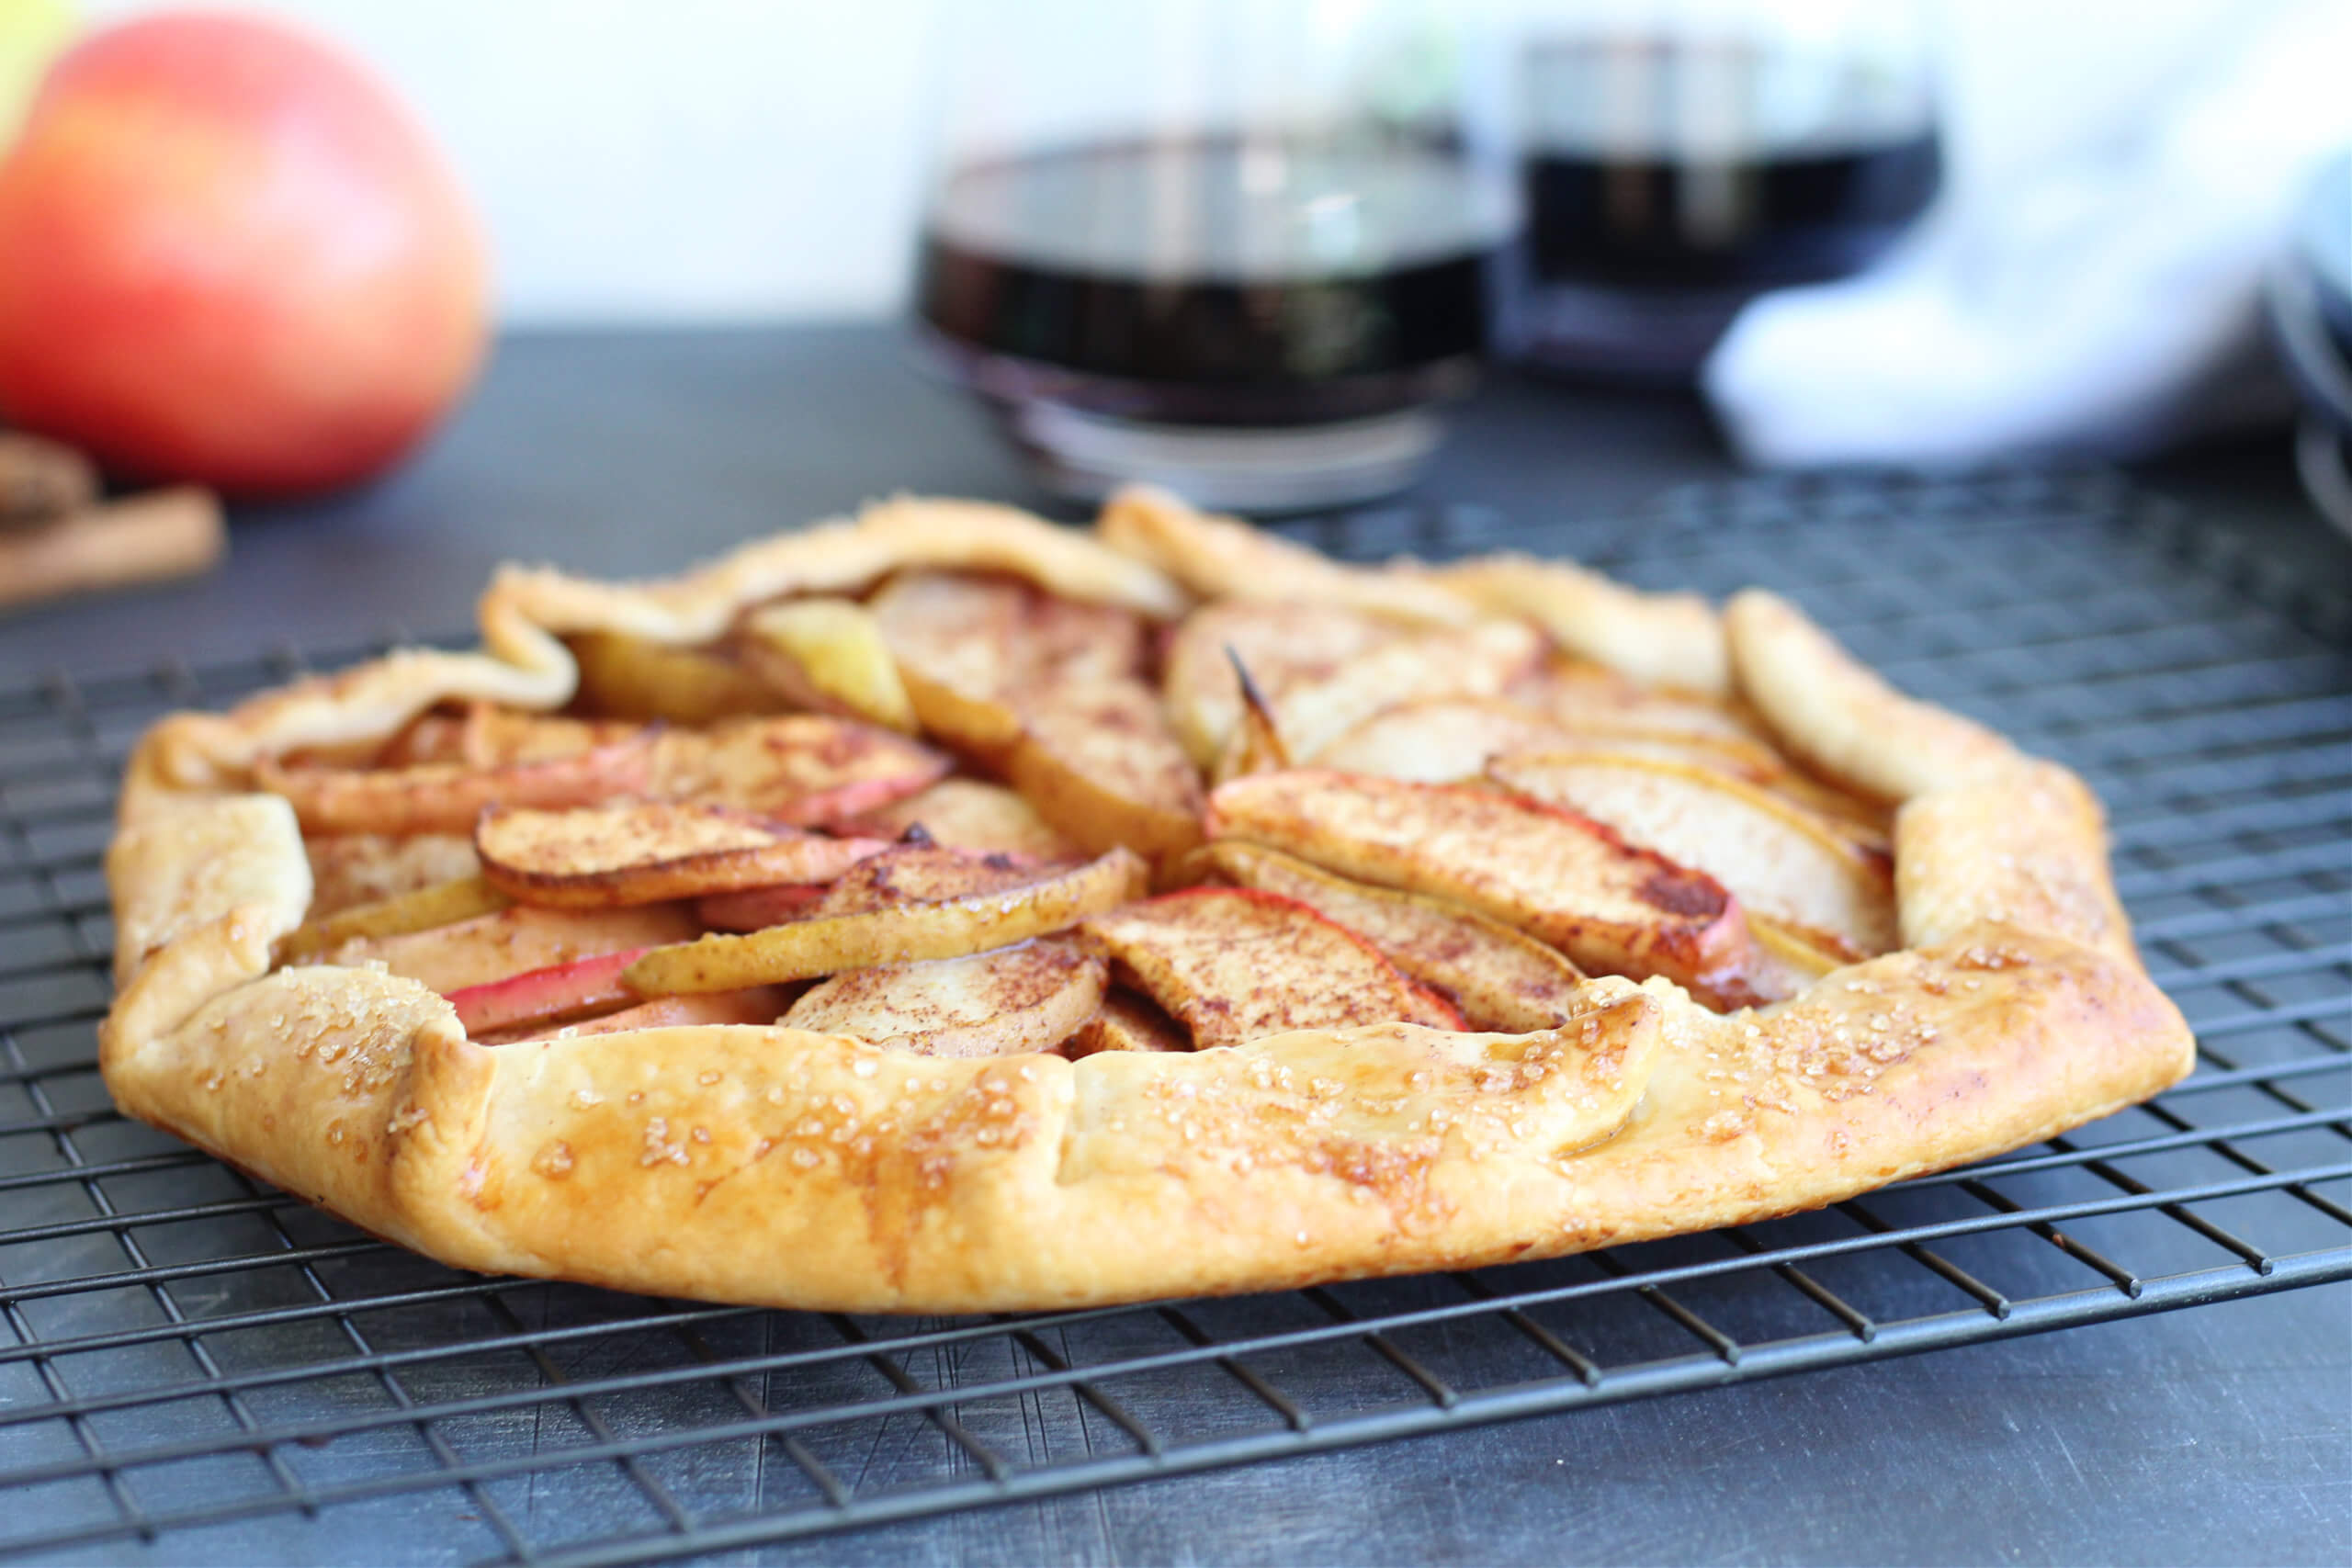 Side view of an Apple & Pear Galette